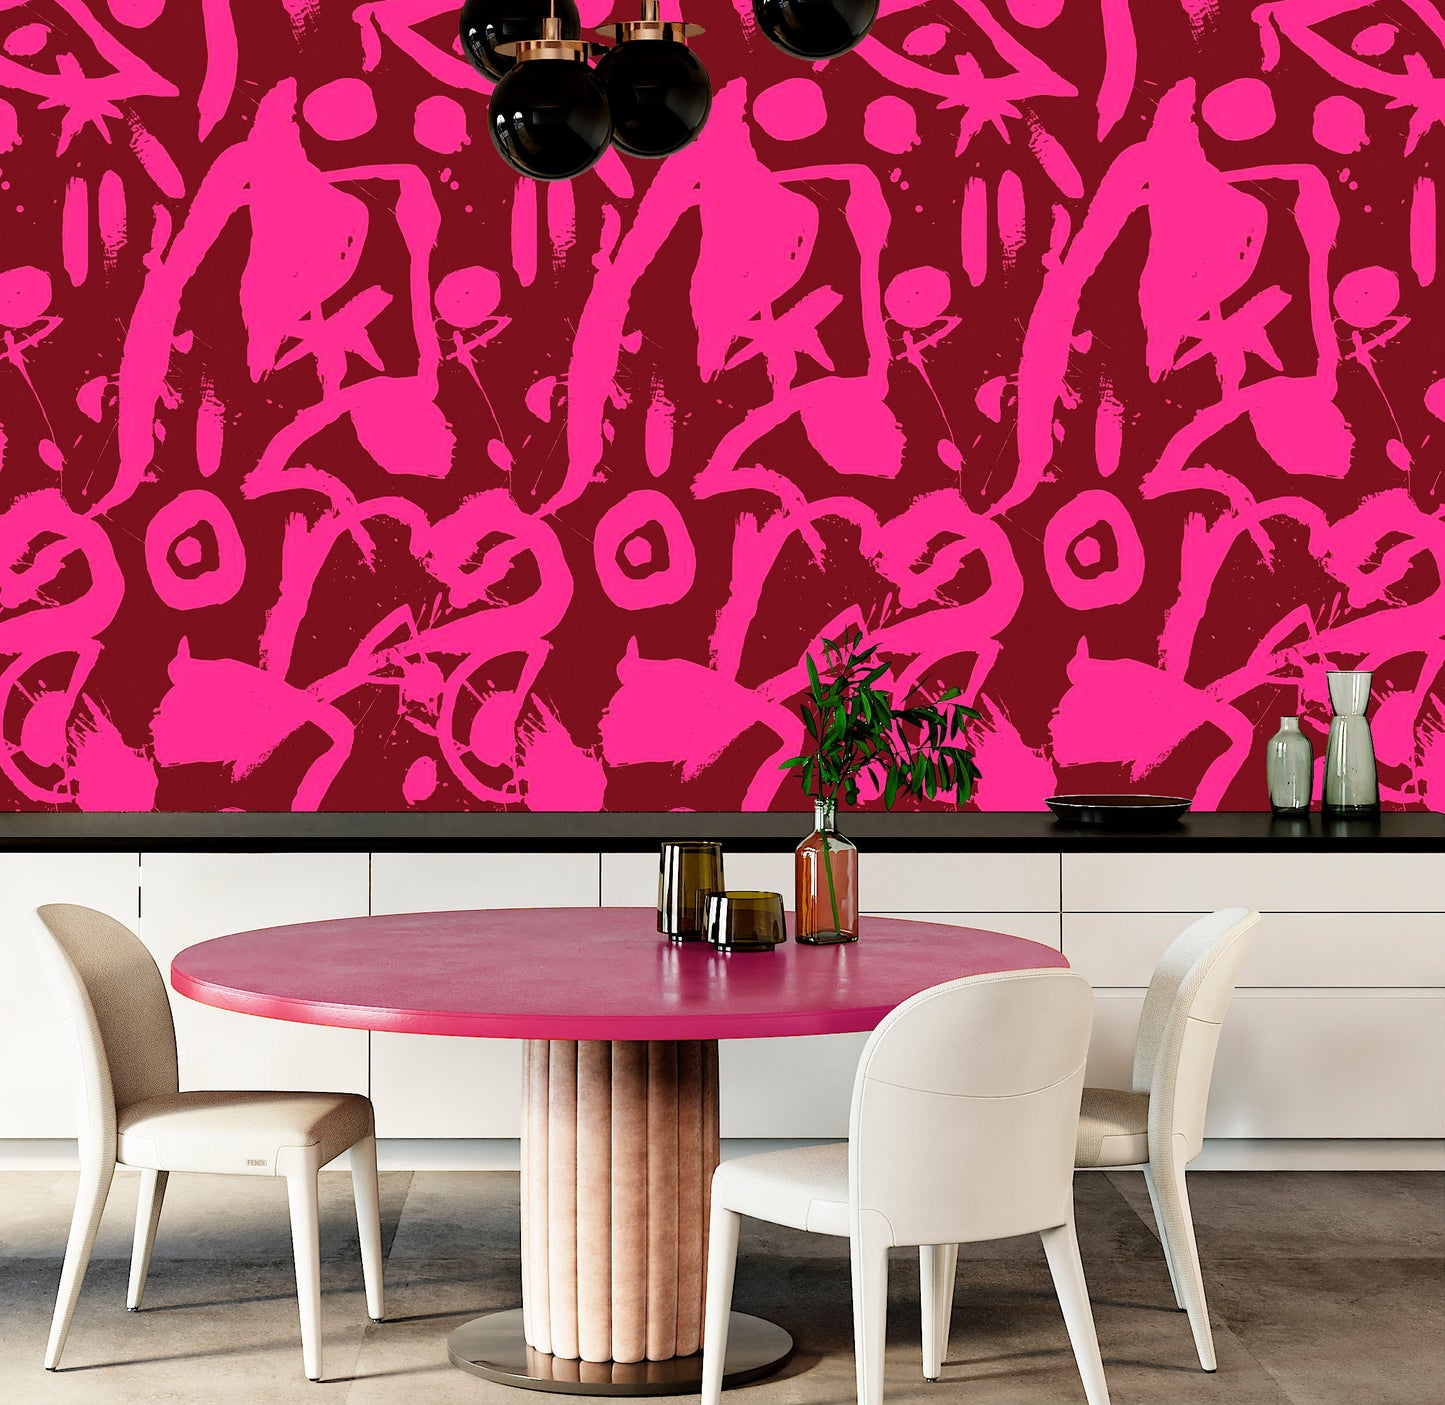 Brush Stroke Wallpaper Peel and Stick, Hot Pink Wallpaper, Colorful Wallaper, Abstract Wallpaper, Removable Wall Paper